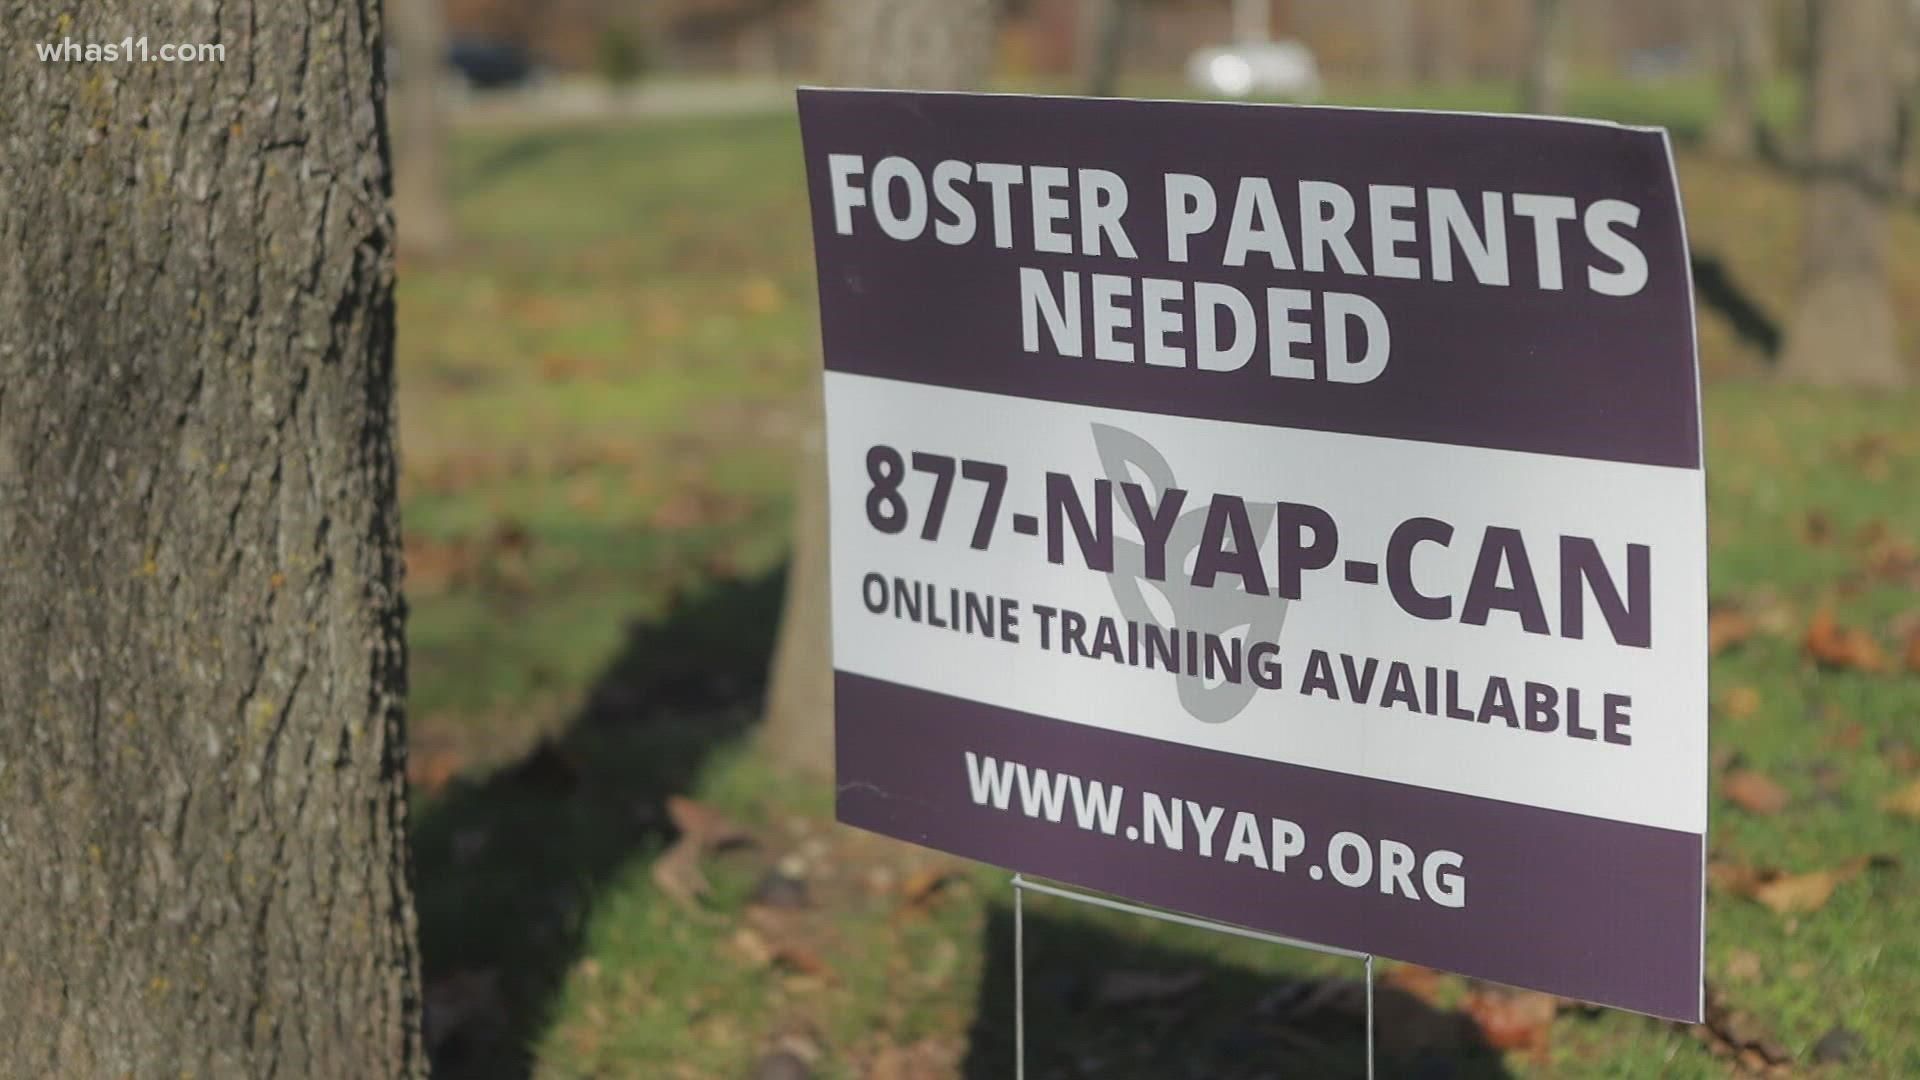 In Indiana, there are more than 14,000 kids in the foster care system, but not enough families to take them in.